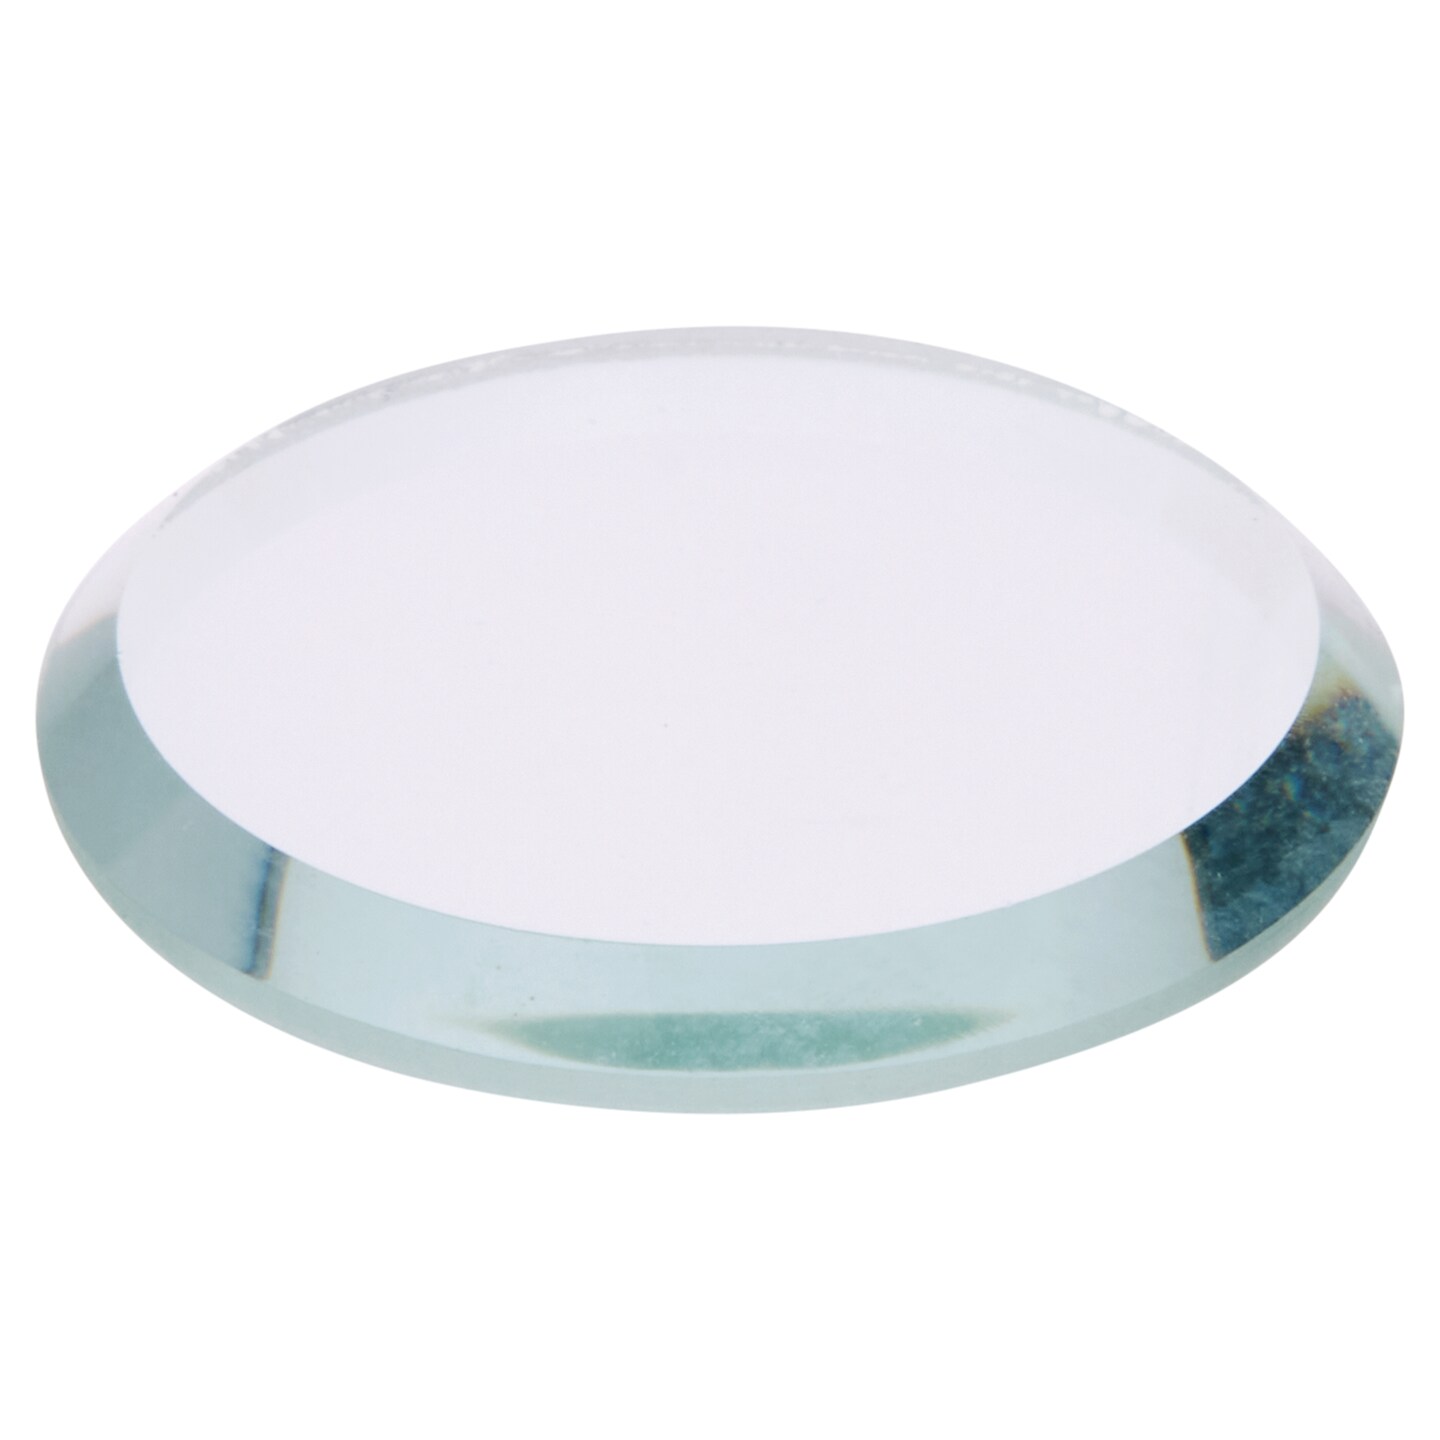 Plymor Round 3mm Beveled Clear Glass, 1 inch x 1 inch